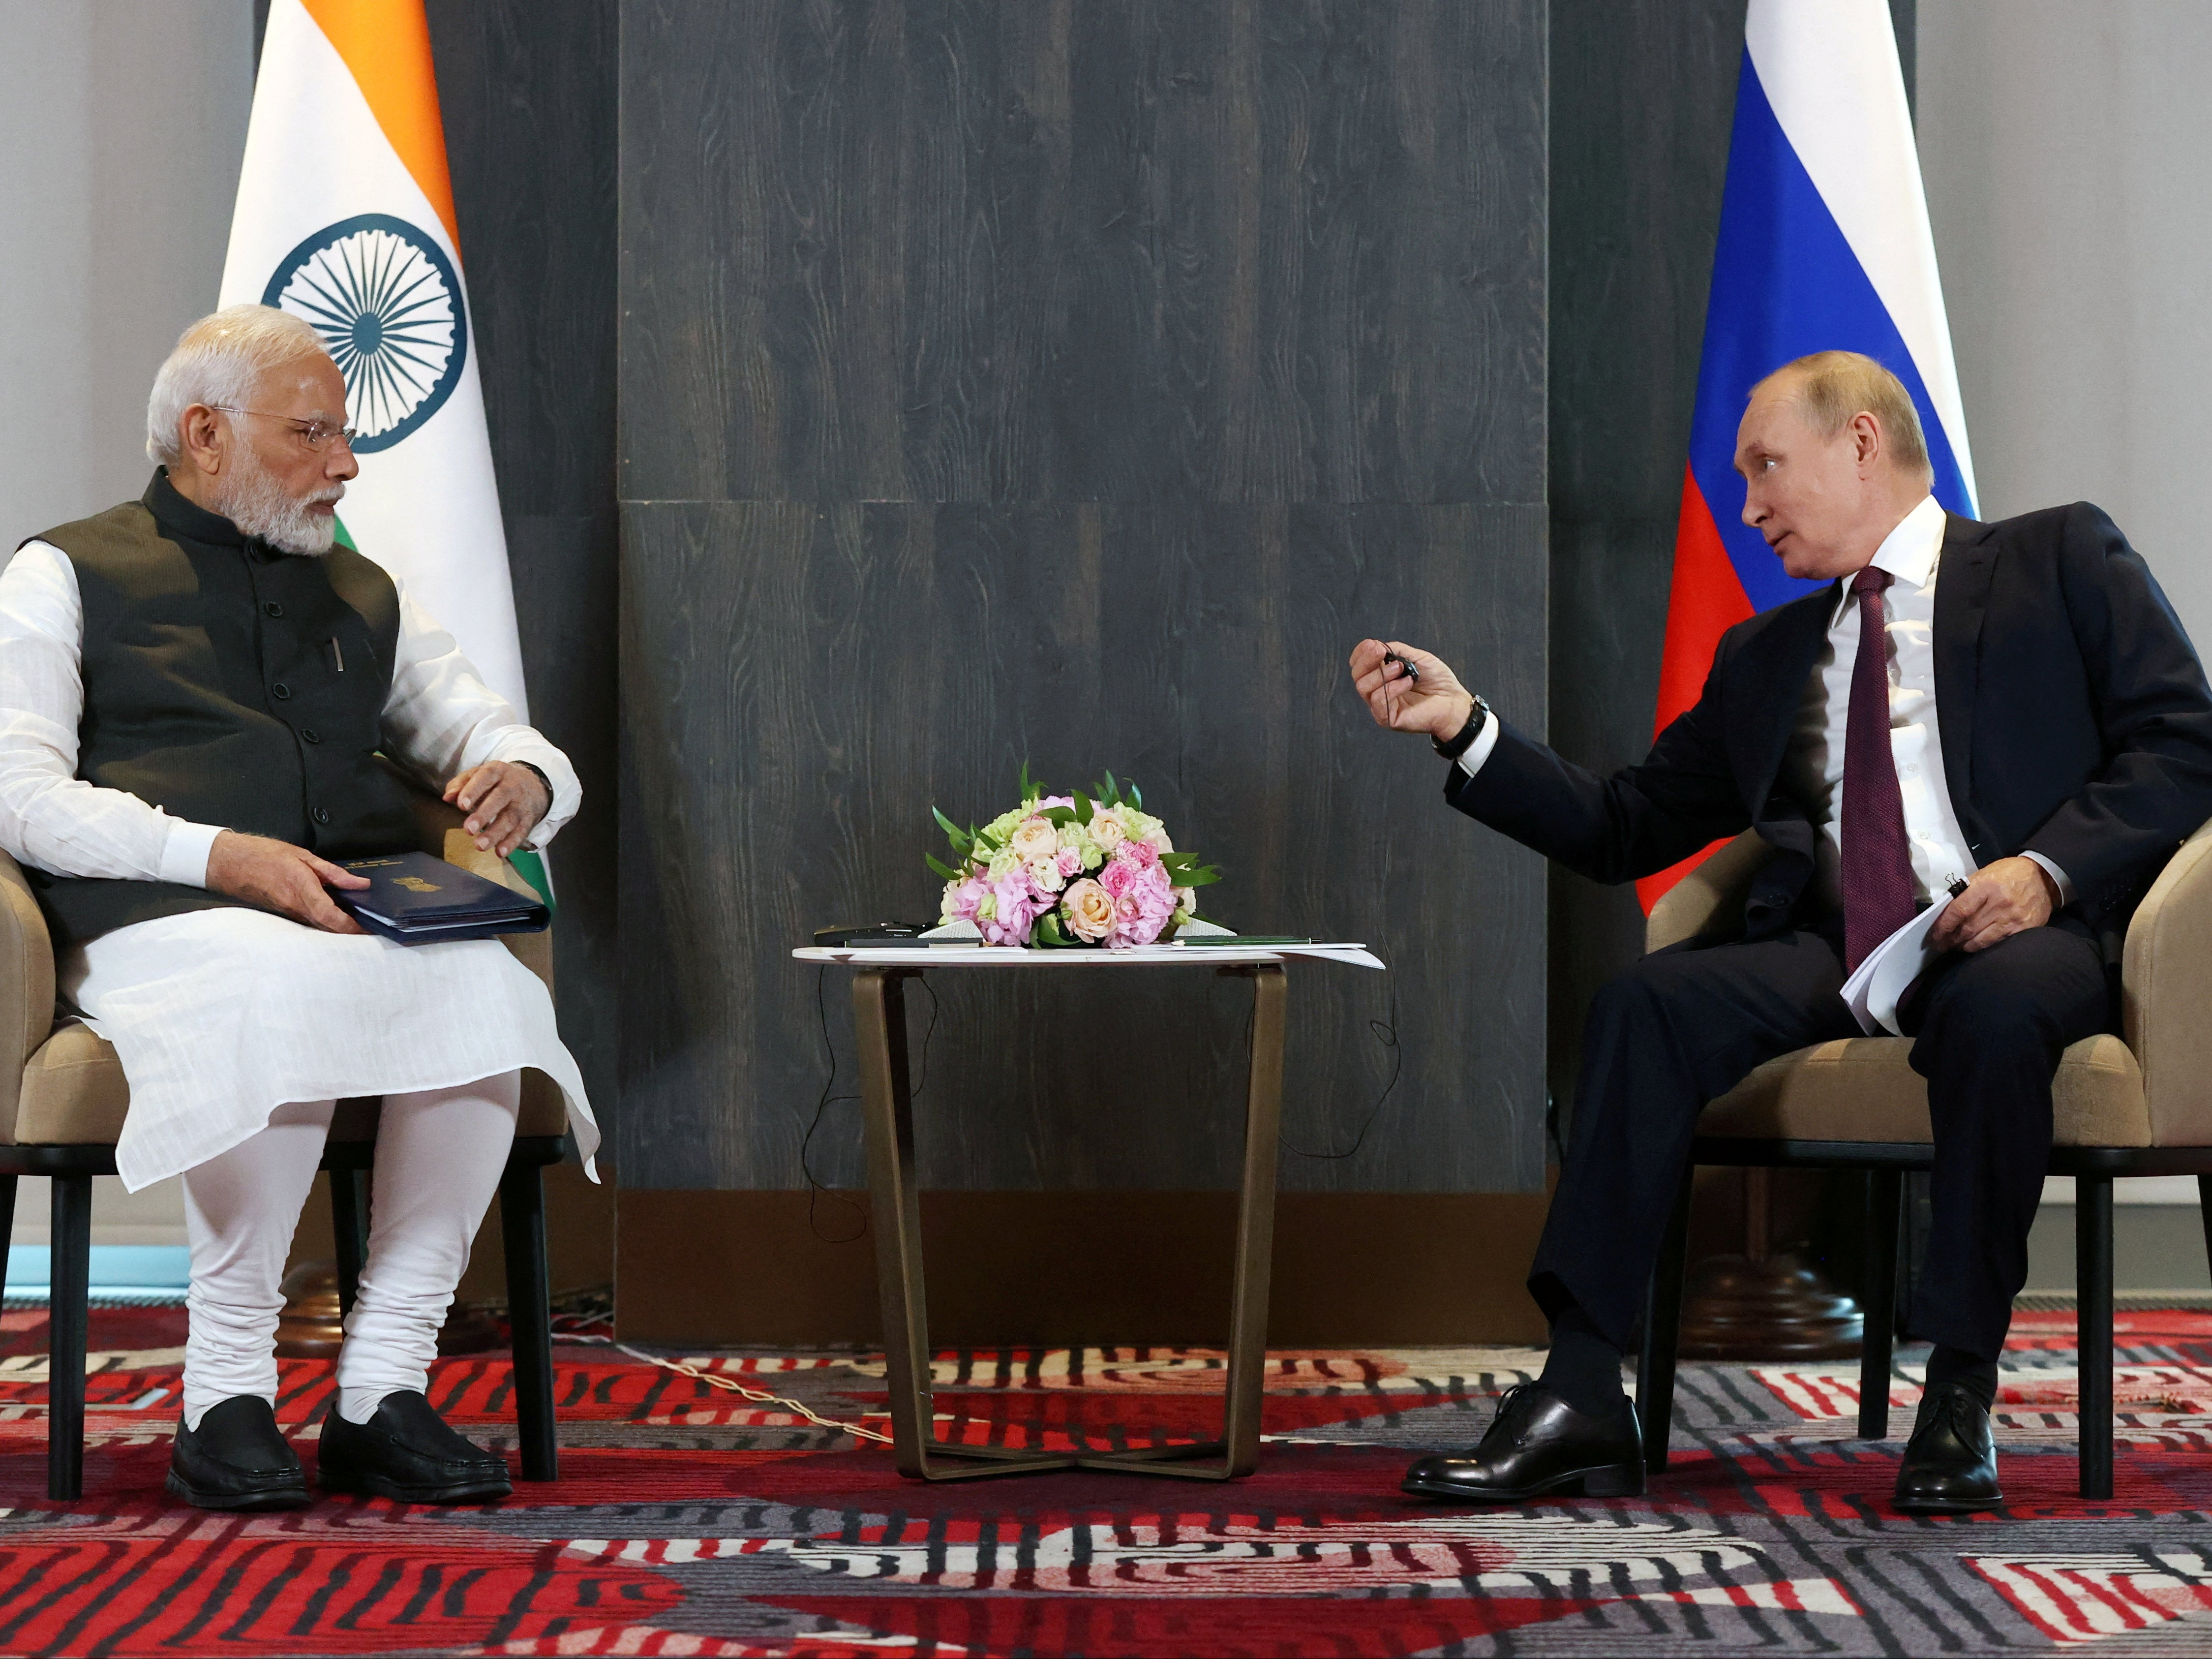 Putin and Indian prime minister Narendra Modi at a meeting on the sidelines of the Shanghai Cooperation Organisation summit in Samarkand, Uzbekistan on 16 September 2022